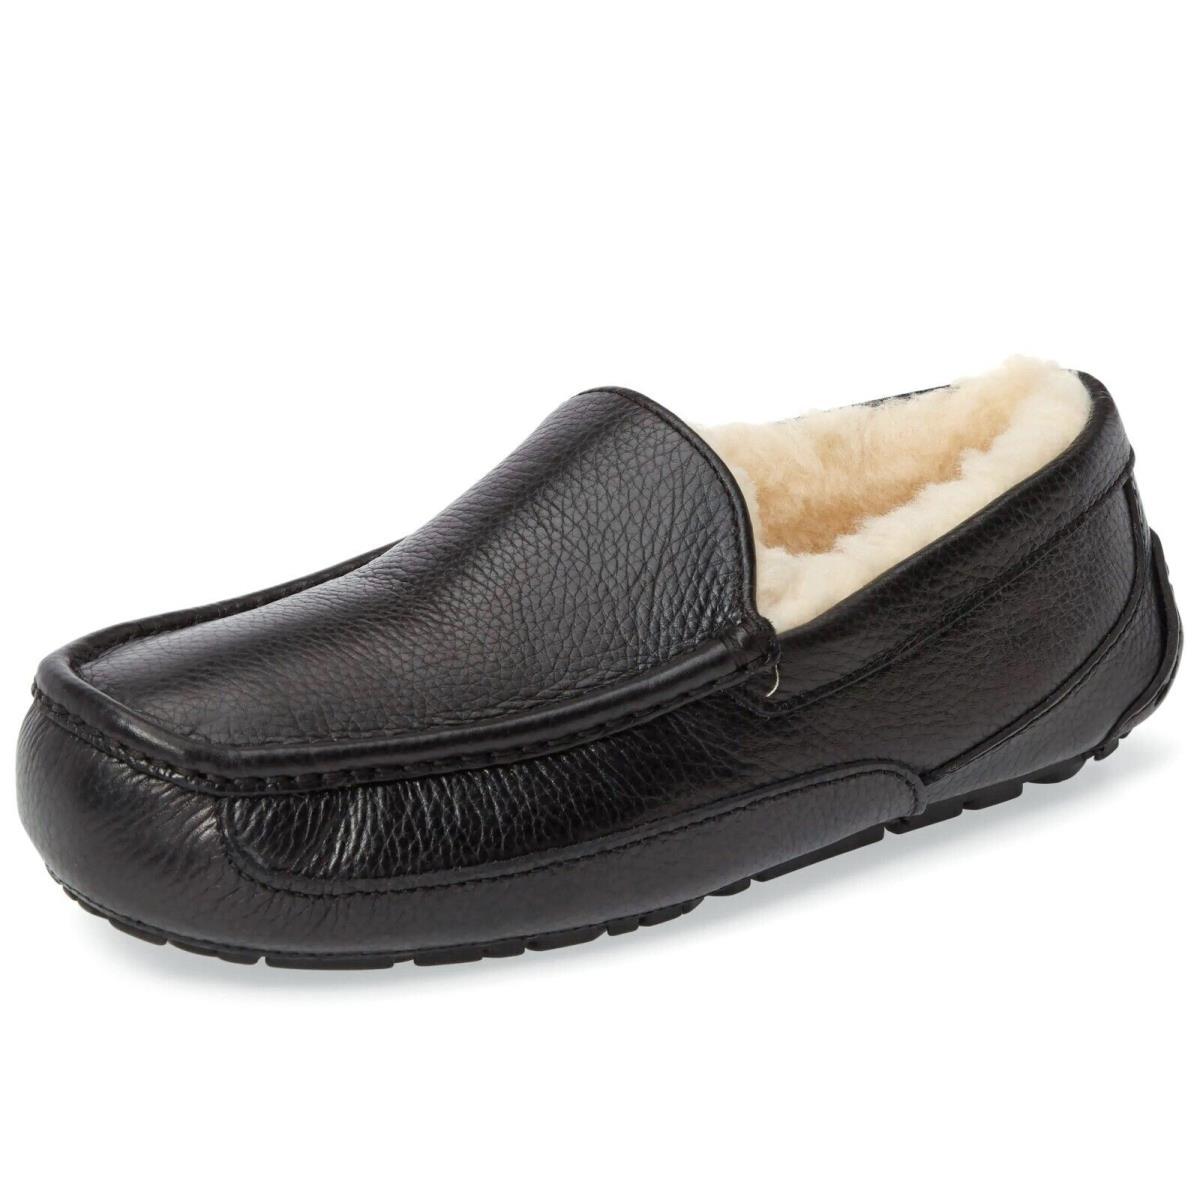 Ugg Men`s Ascot Wool Lined Leather Slippers Moccasin Loafers Shoes Black Size 12